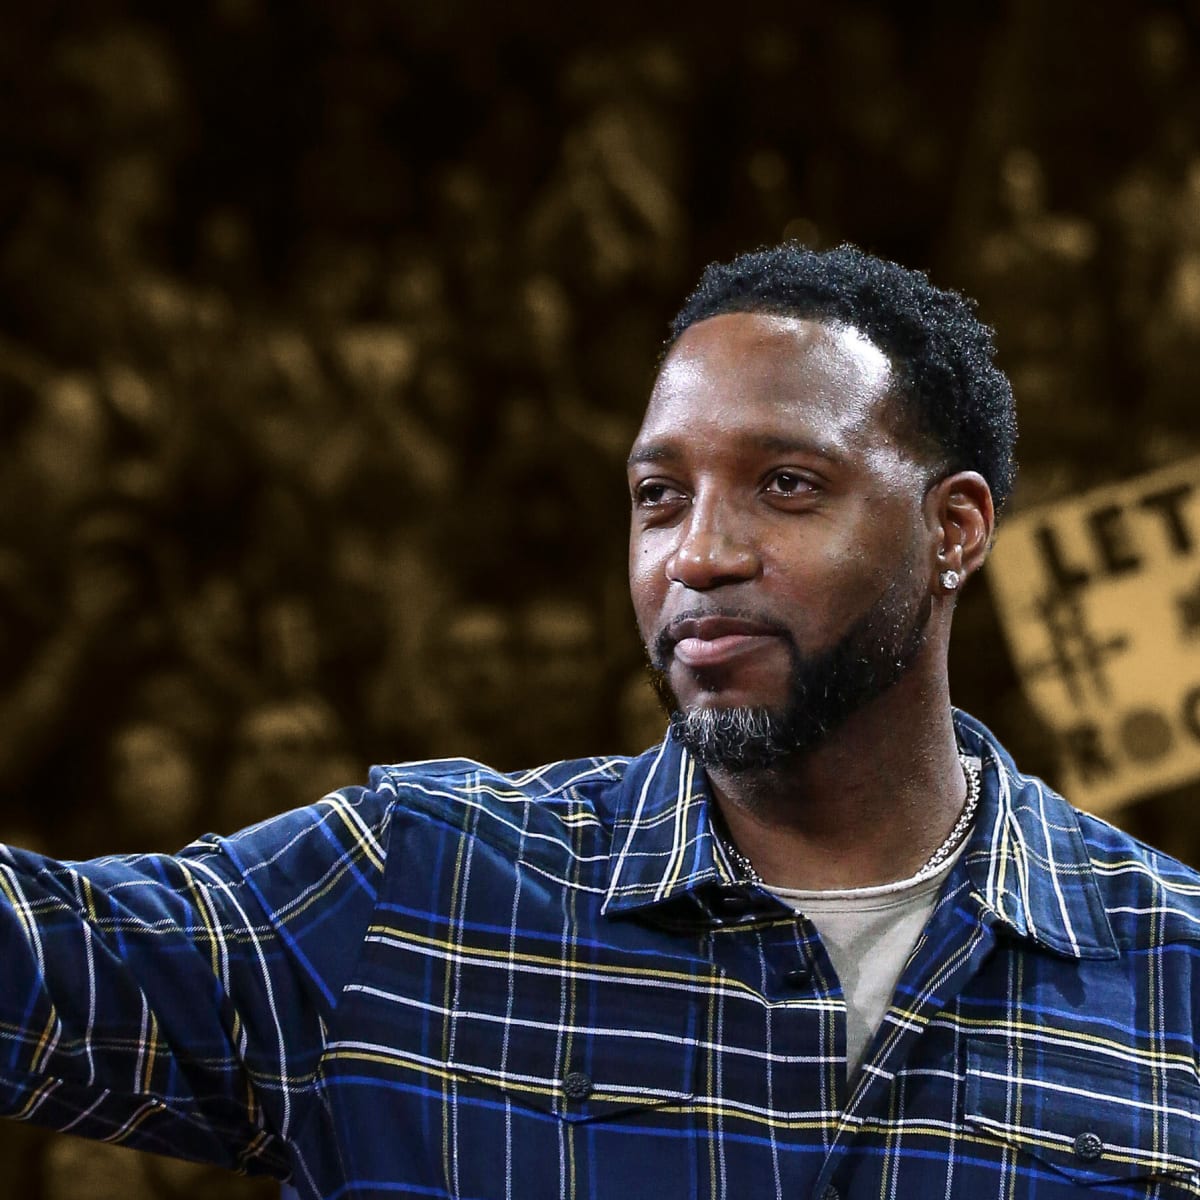 NBA Buzz - Happy 44th birthday, Tracy McGrady! 🎉 T-Mac says that if he  played in the prime of his career in the modern NBA, he'd average 35-40 PPG  “easily.” McGrady in